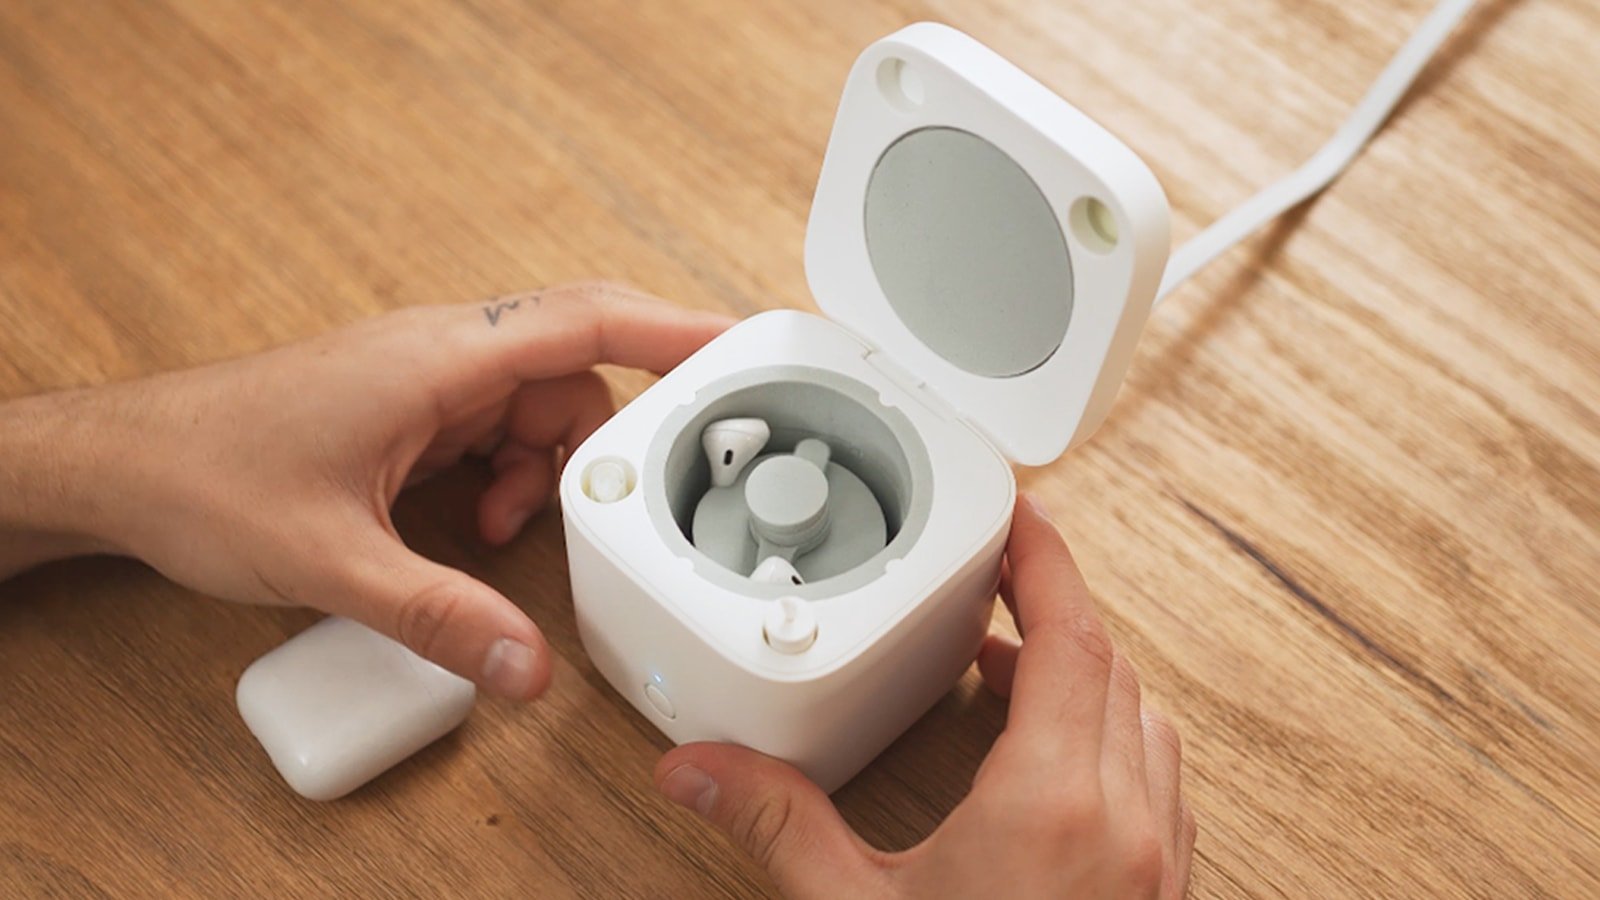 Cardlax AirPods washer automatically cleans wireless stereos and earbuds in minutes